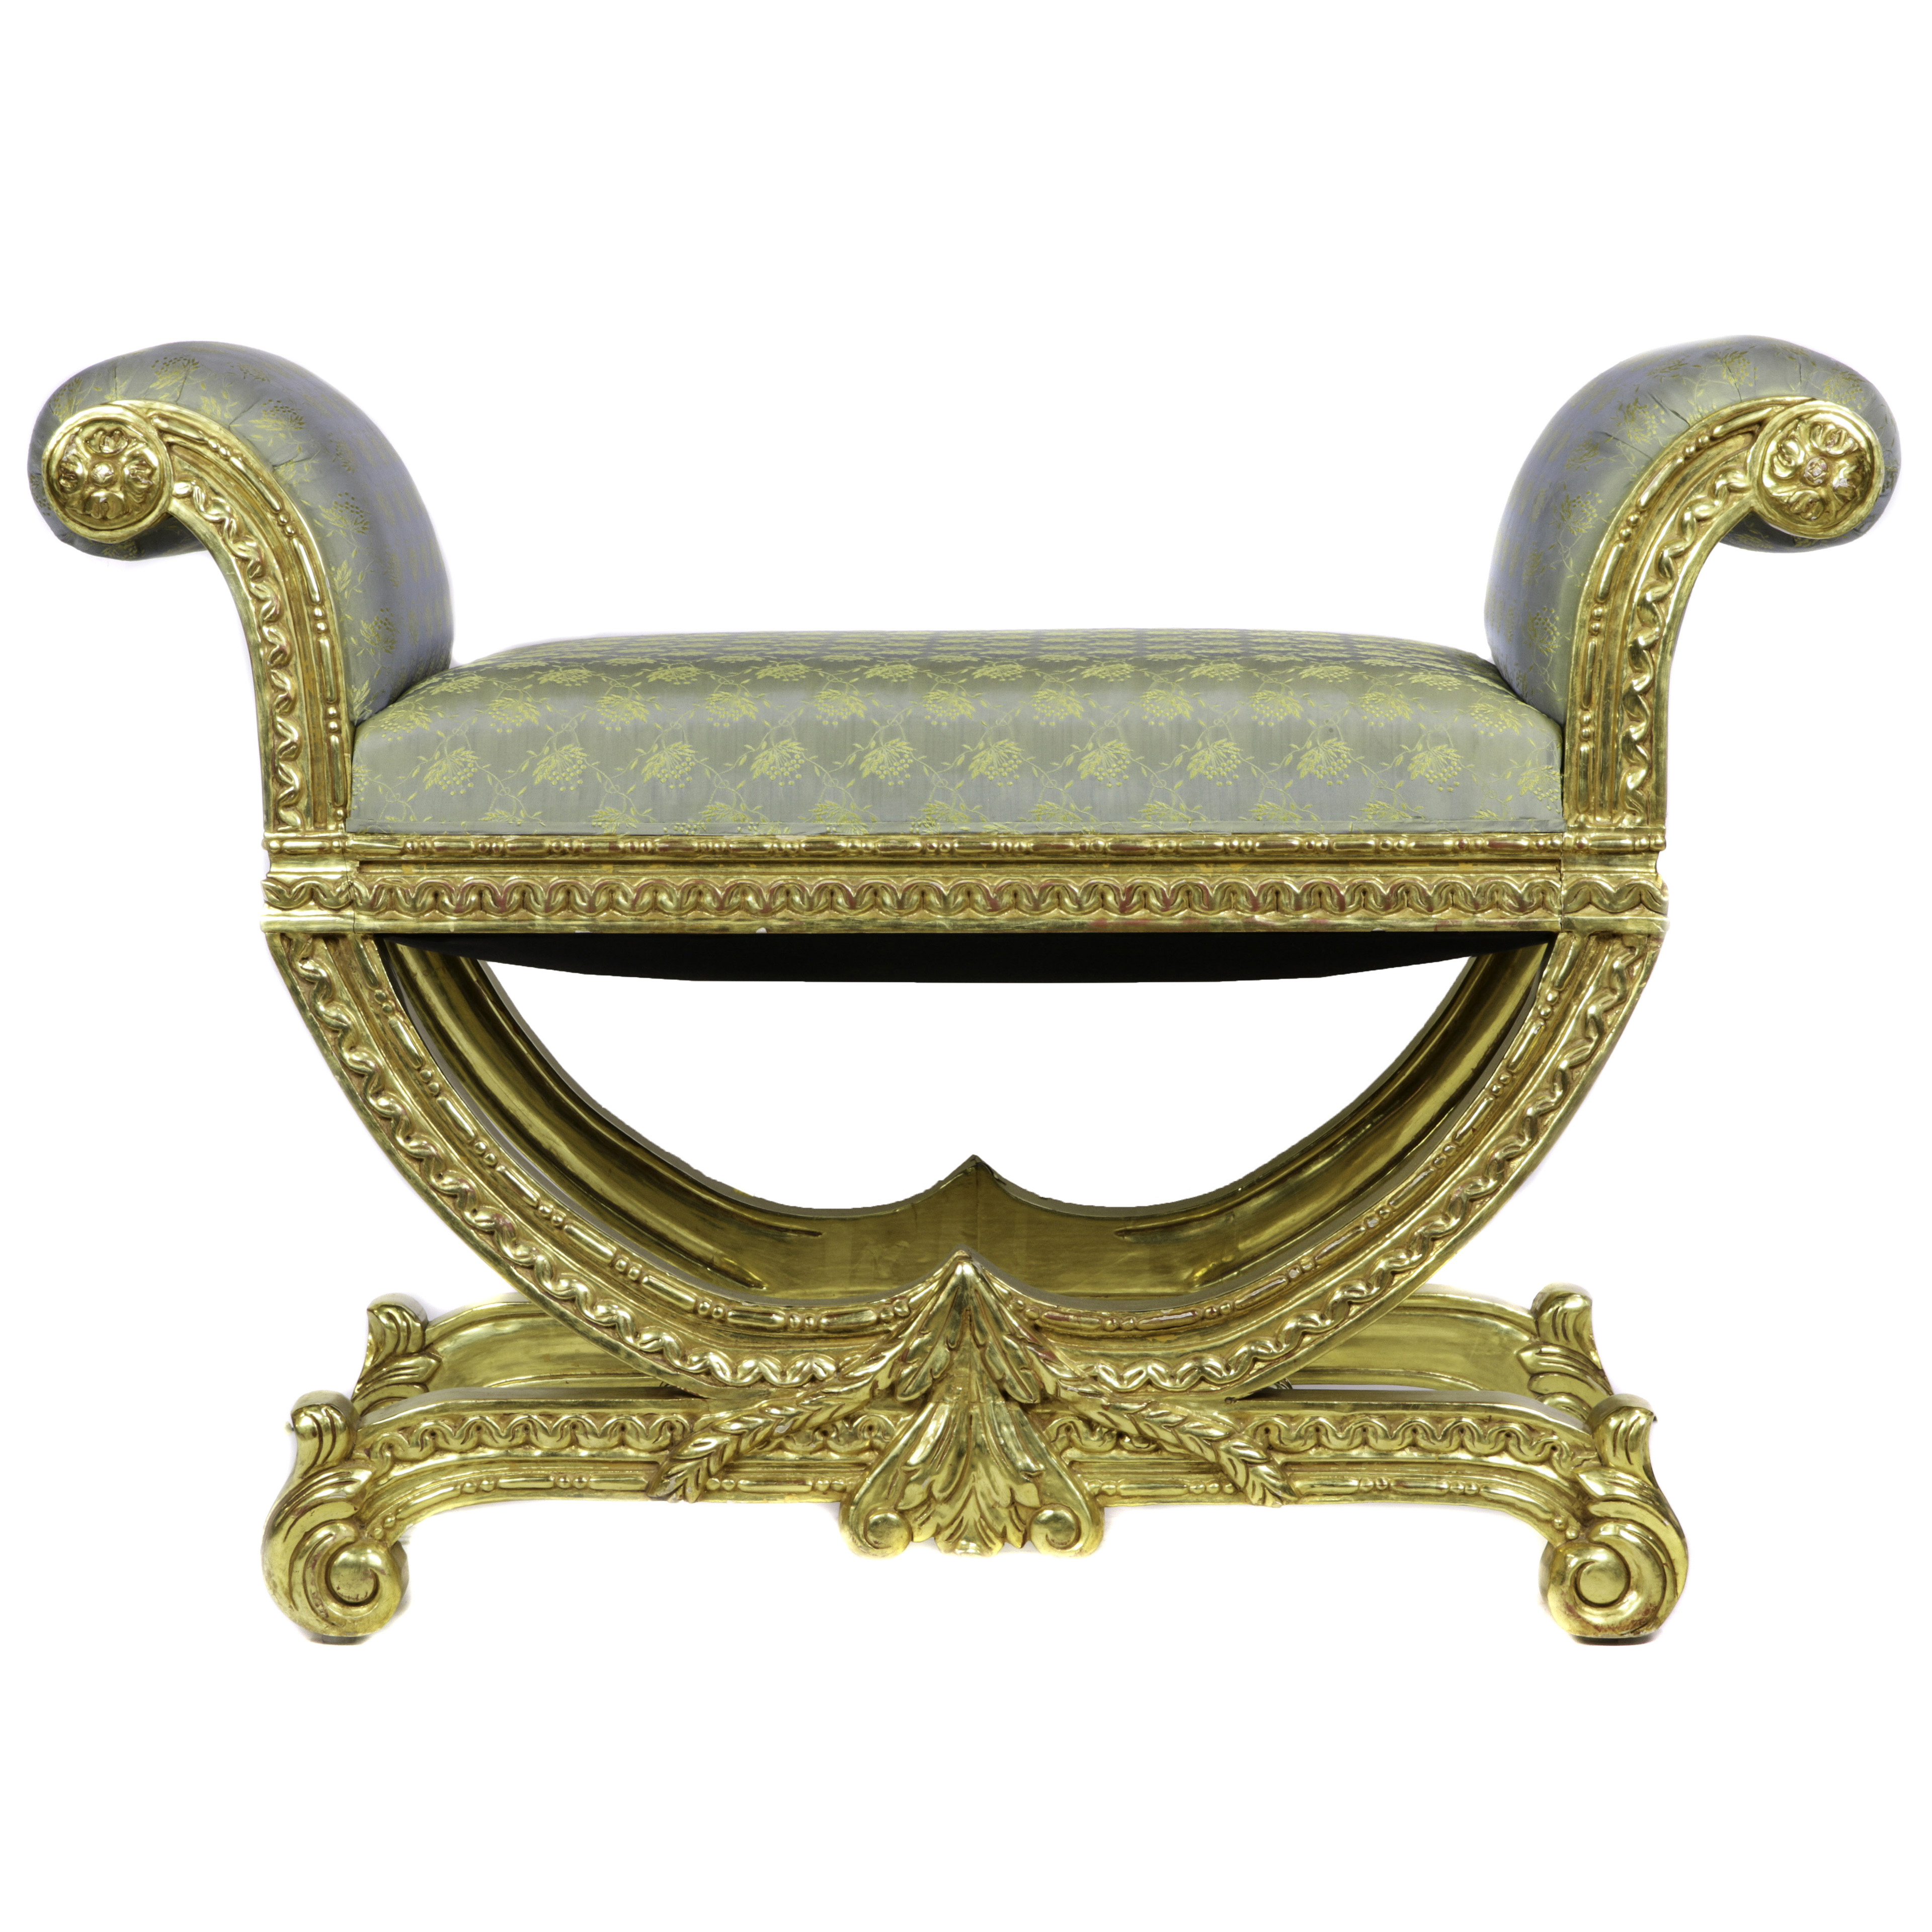 FRENCH GILTWOOD CARVED WINDOW BENCH 3a4ca1